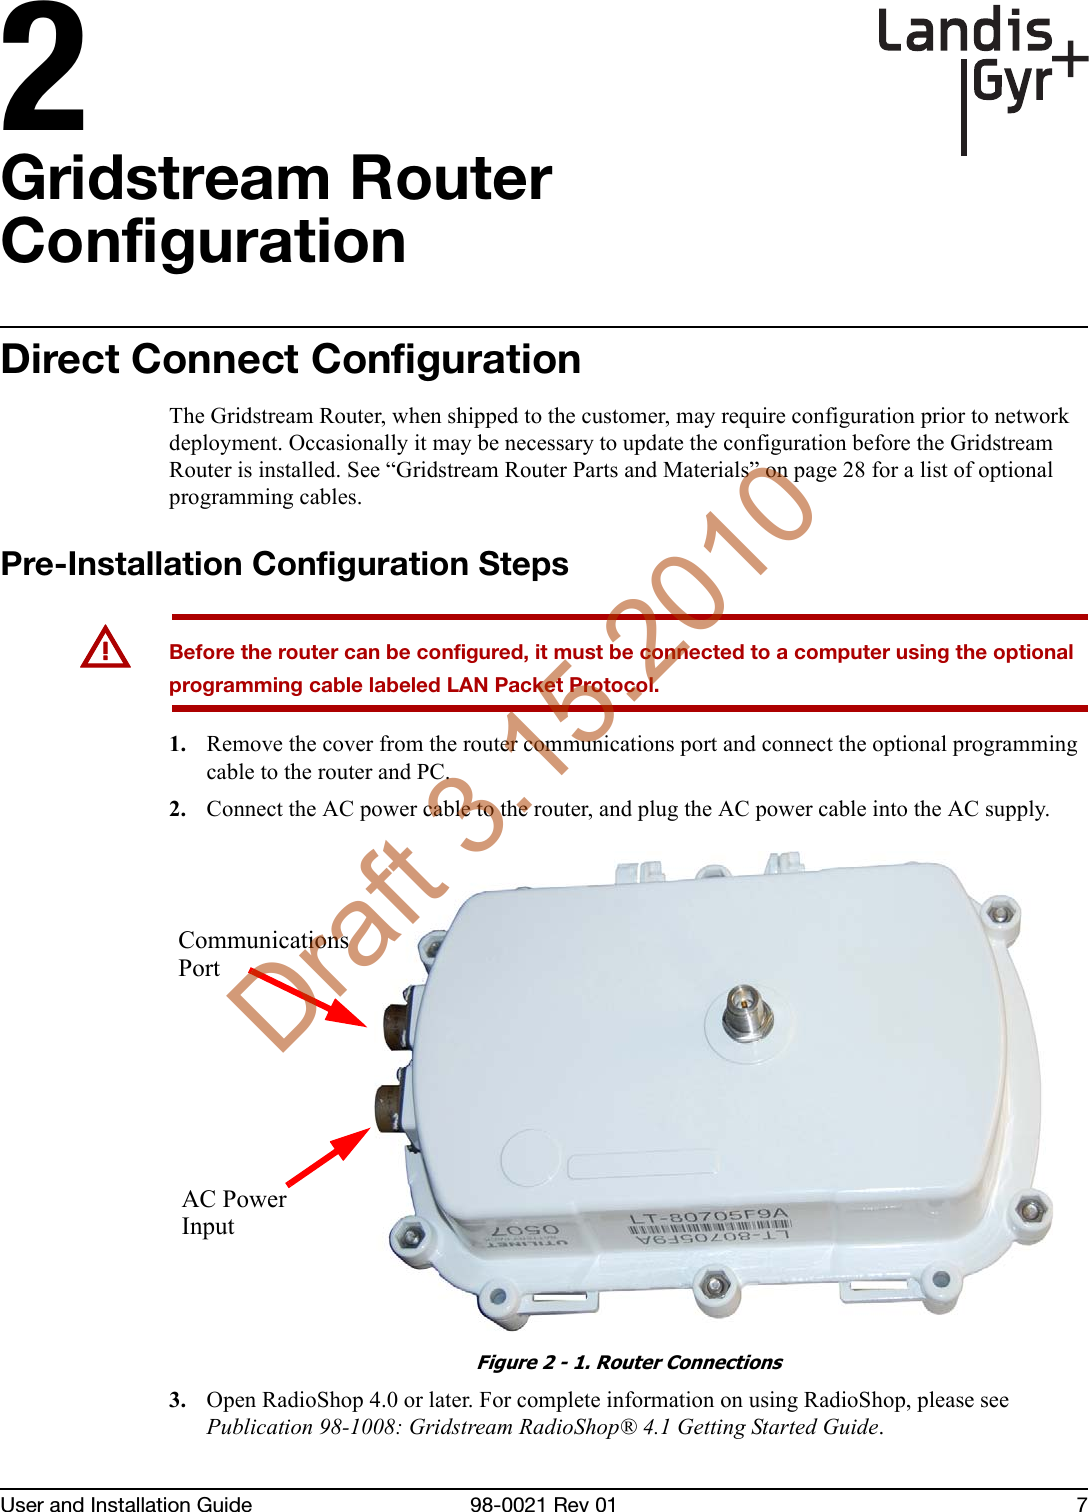 2User and Installation Guide 98-0021 Rev 01 7Gridstream Router ConfigurationDirect Connect ConfigurationThe Gridstream Router, when shipped to the customer, may require configuration prior to network deployment. Occasionally it may be necessary to update the configuration before the Gridstream Router is installed. See “Gridstream Router Parts and Materials” on page 28 for a list of optional programming cables.Pre-Installation Configuration StepsUBefore the router can be configured, it must be connected to a computer using the optional programming cable labeled LAN Packet Protocol.1. Remove the cover from the router communications port and connect the optional programming cable to the router and PC.2. Connect the AC power cable to the router, and plug the AC power cable into the AC supply.Figure 2 - 1. Router Connections3. Open RadioShop 4.0 or later. For complete information on using RadioShop, please see Publication 98-1008: Gridstream RadioShop® 4.1 Getting Started Guide.AC PowerInputCommunicationsPortDraft 3.15.2010